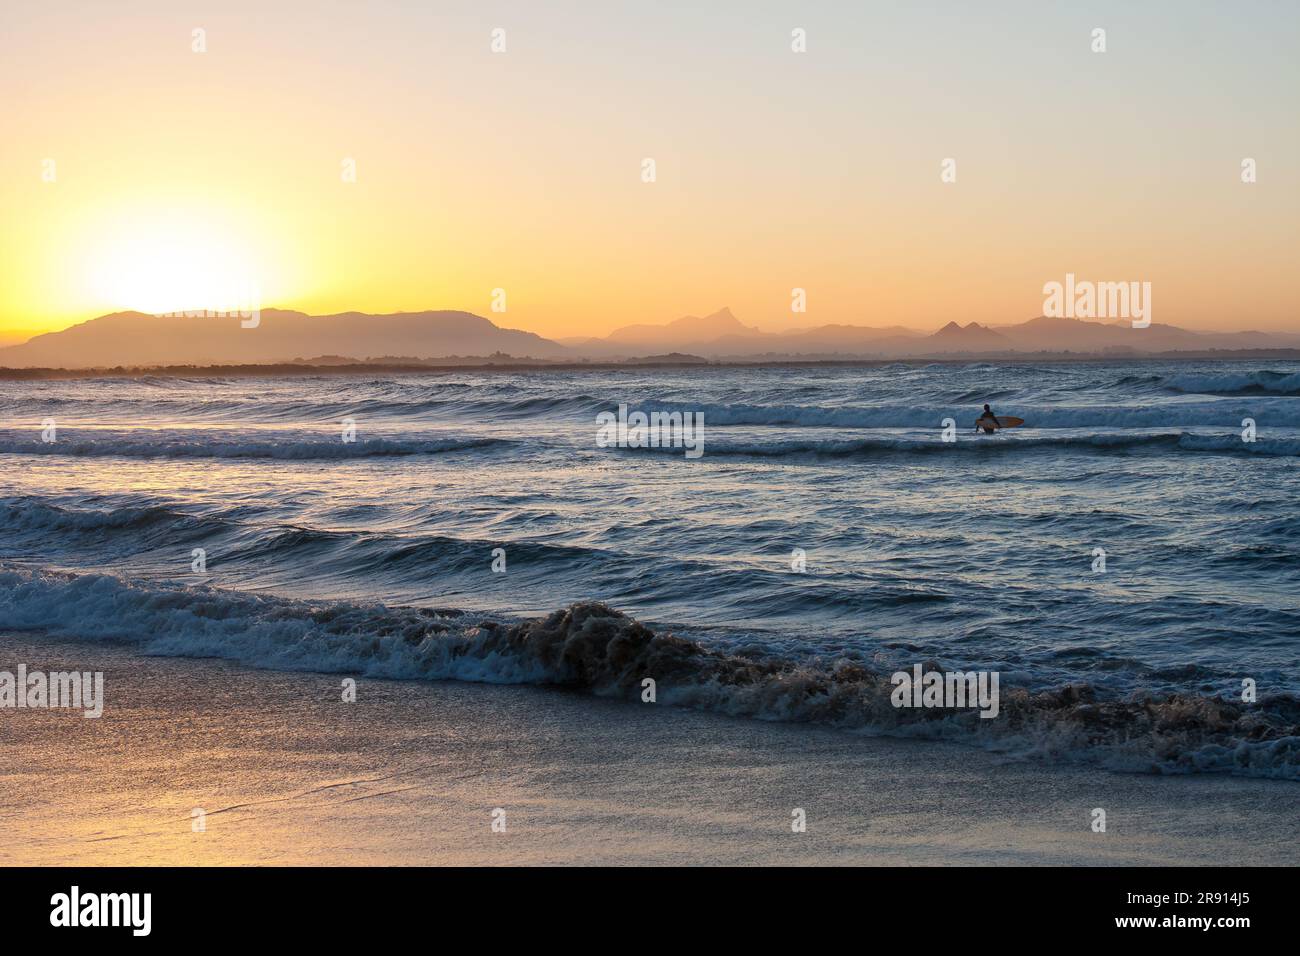 Lone surfer in the water in Byron Bay, Australia at sunset. Stock Photo